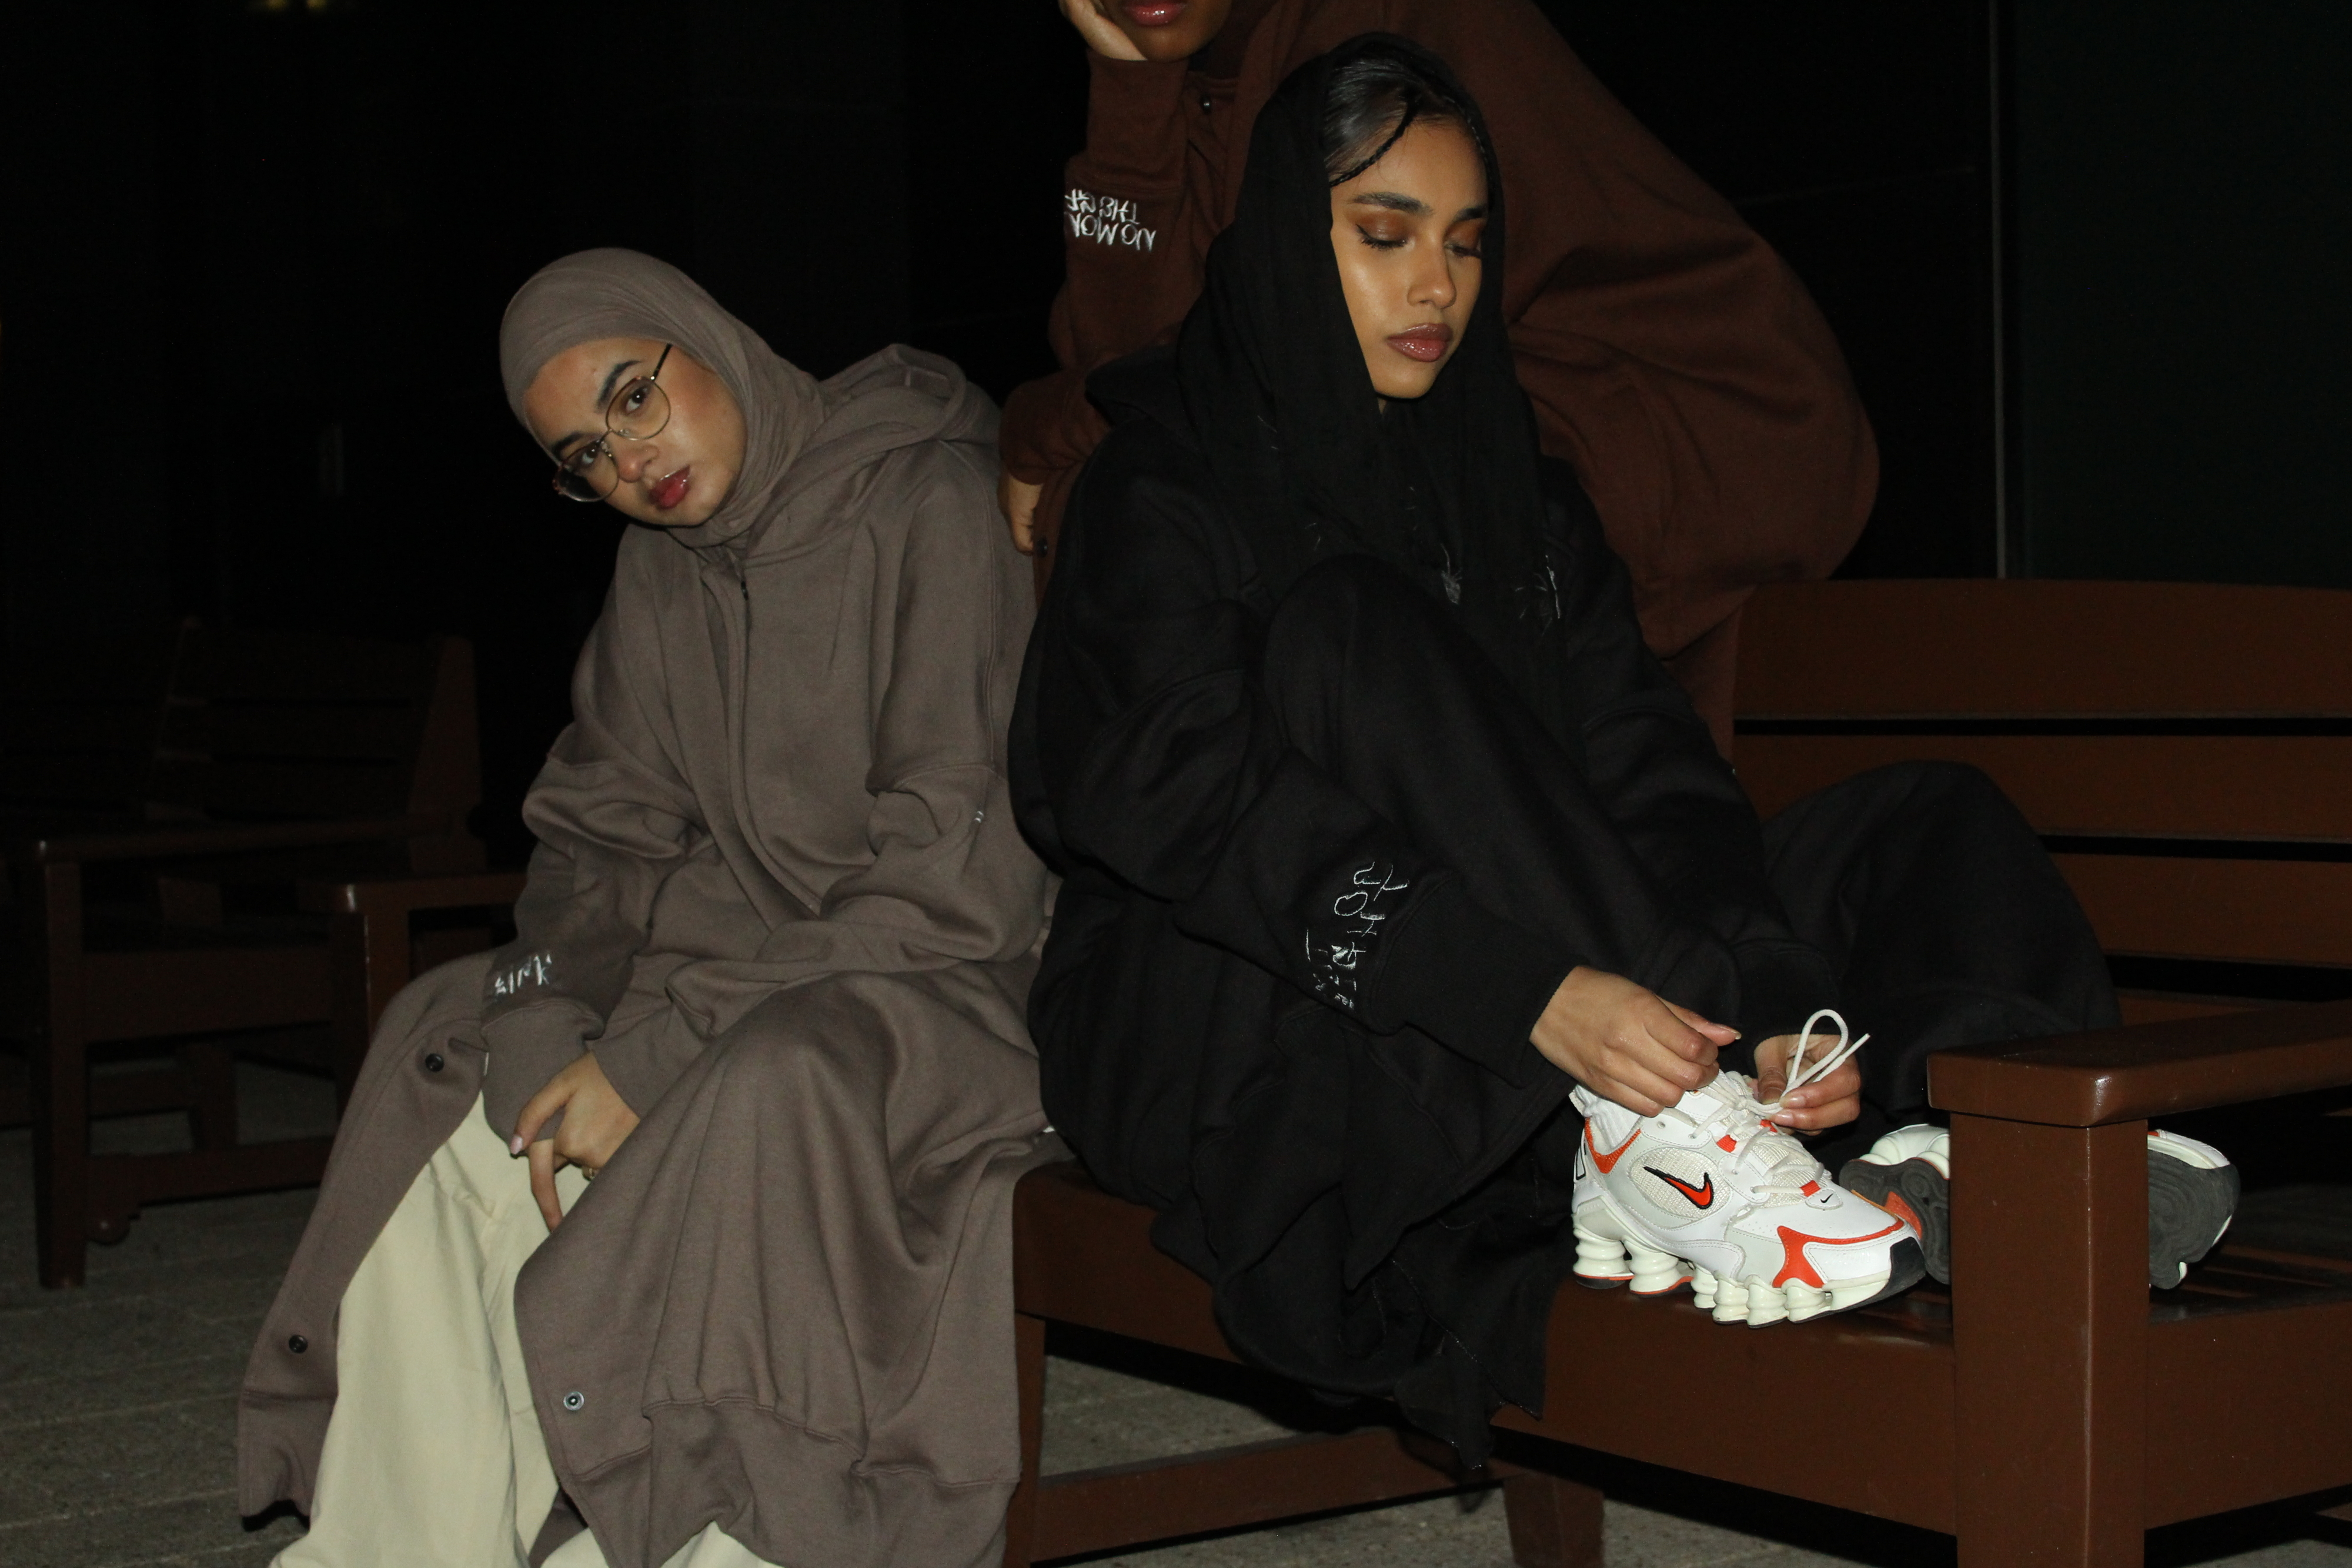 Two individuals in stylish modest fashion seated on a bench at night